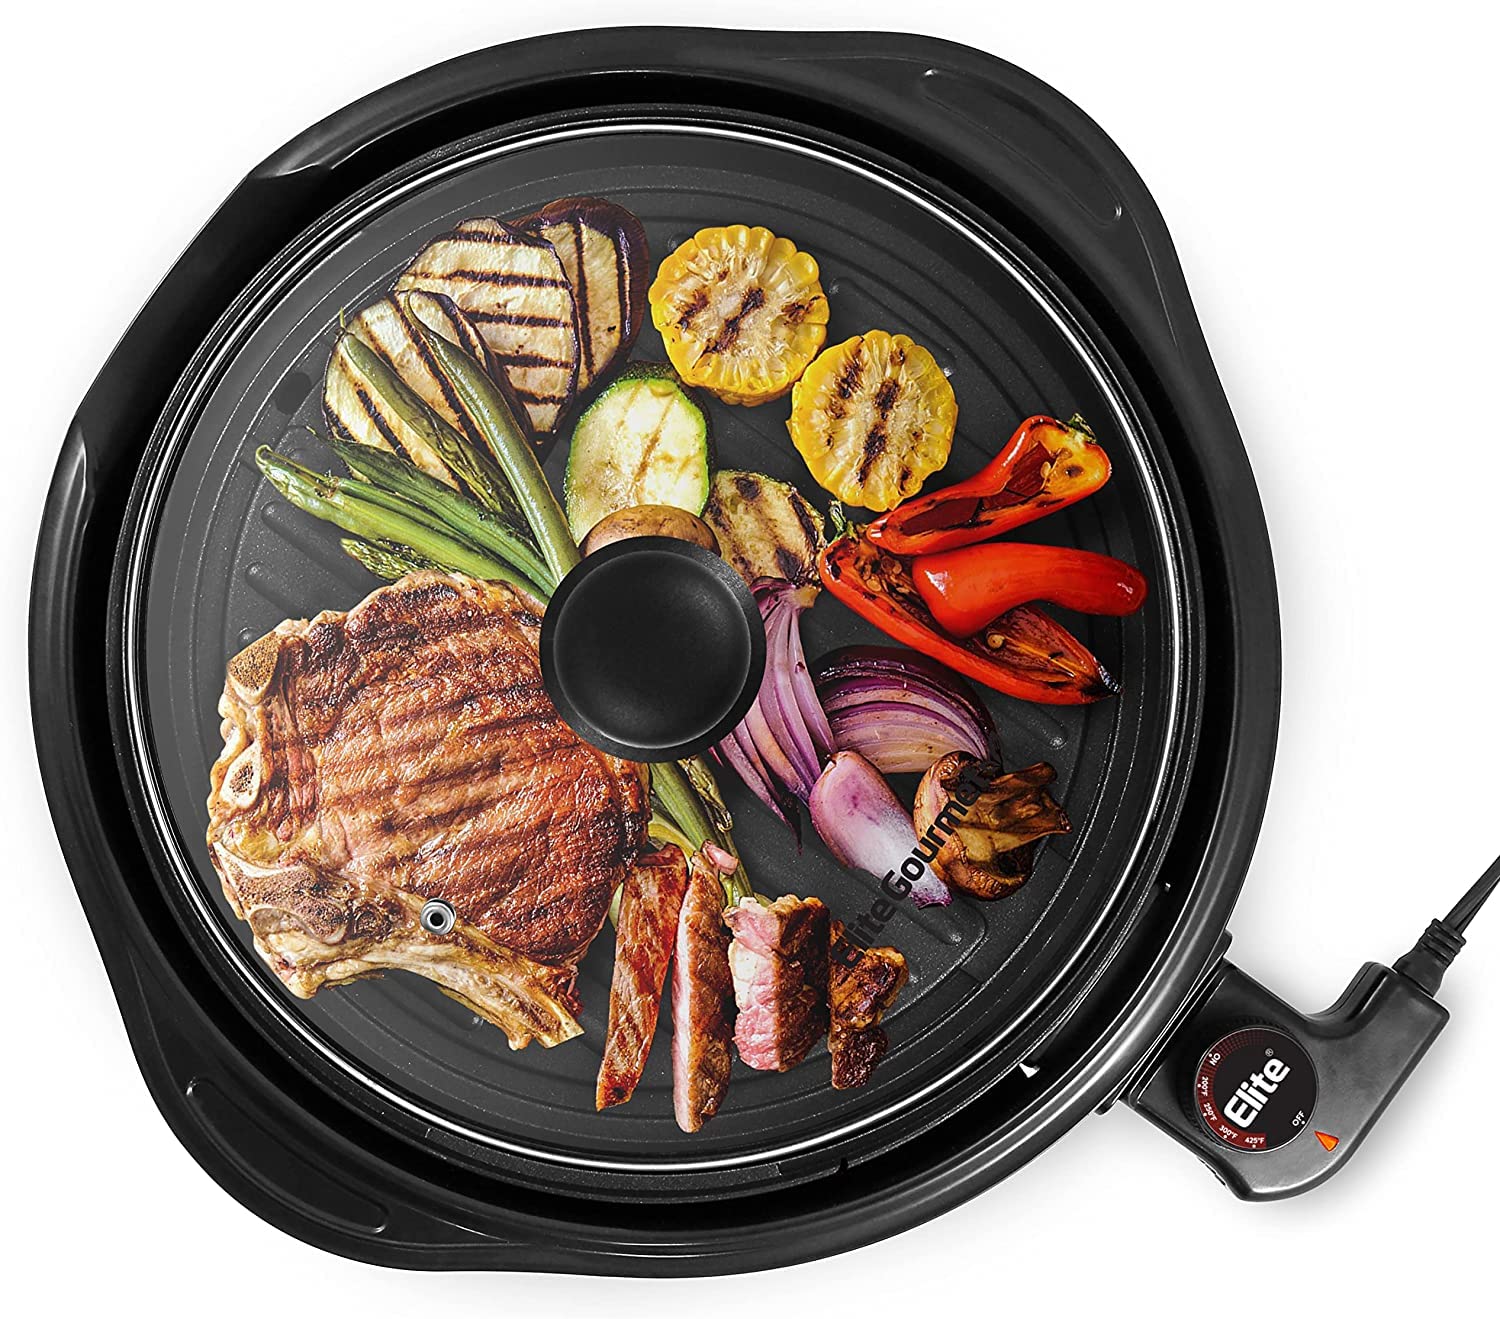 Elite Gourmet EMG1100 Electric Indoor Nonstick Grill, Dishwasher Safe, Cool Touch, Fast Heat Up Ideal Low-Fat Meals, Includes Tempered Glass Lid, 11